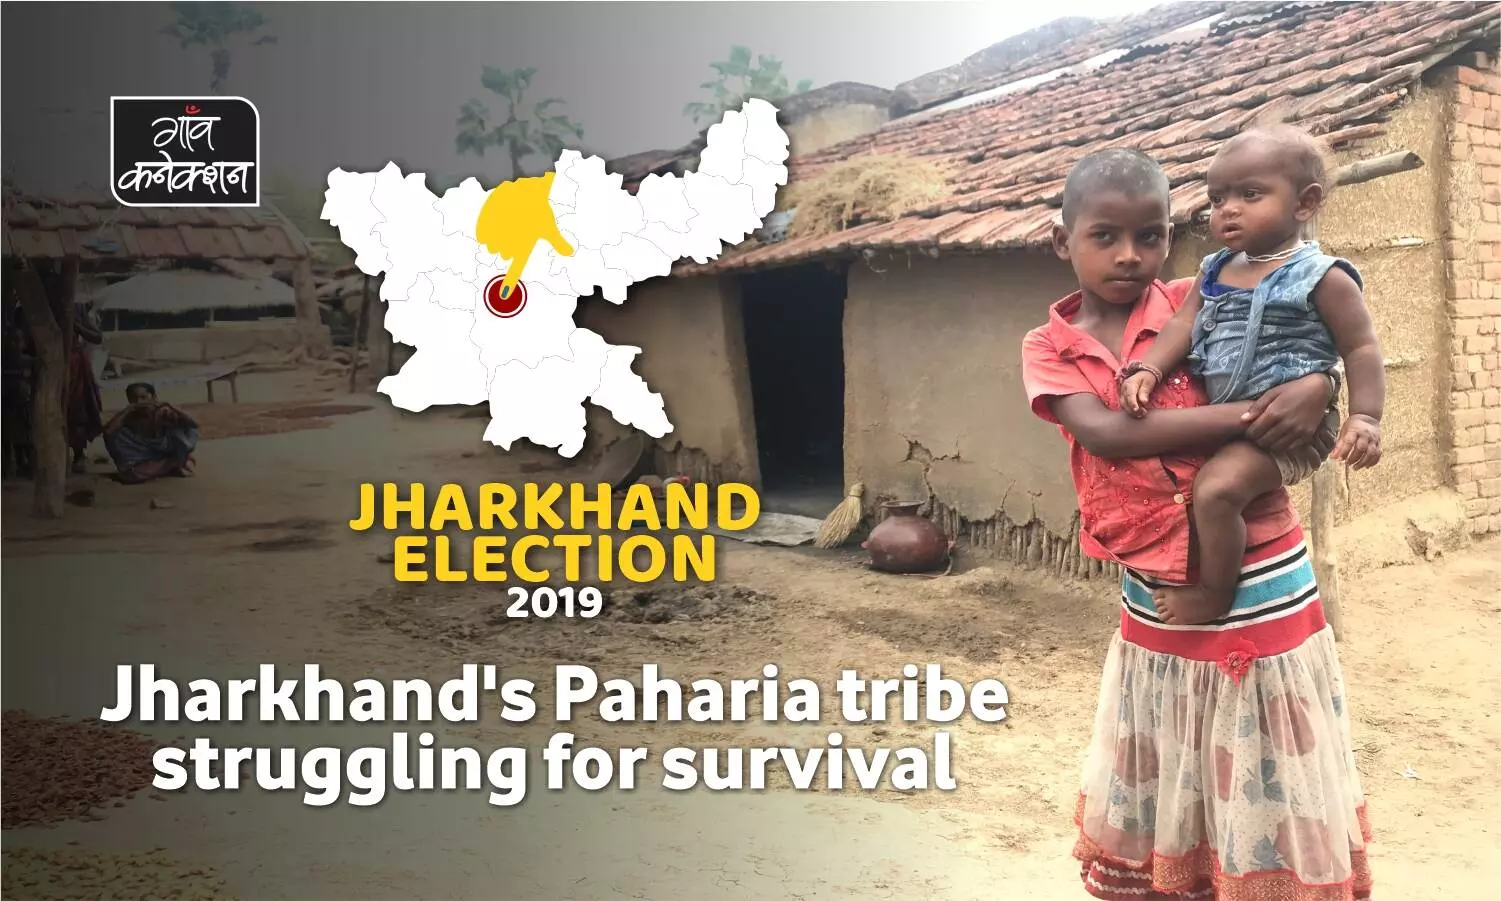 Rulers reduced to a particularly vulnerable tribe. The story of Jharkhands Paharia.